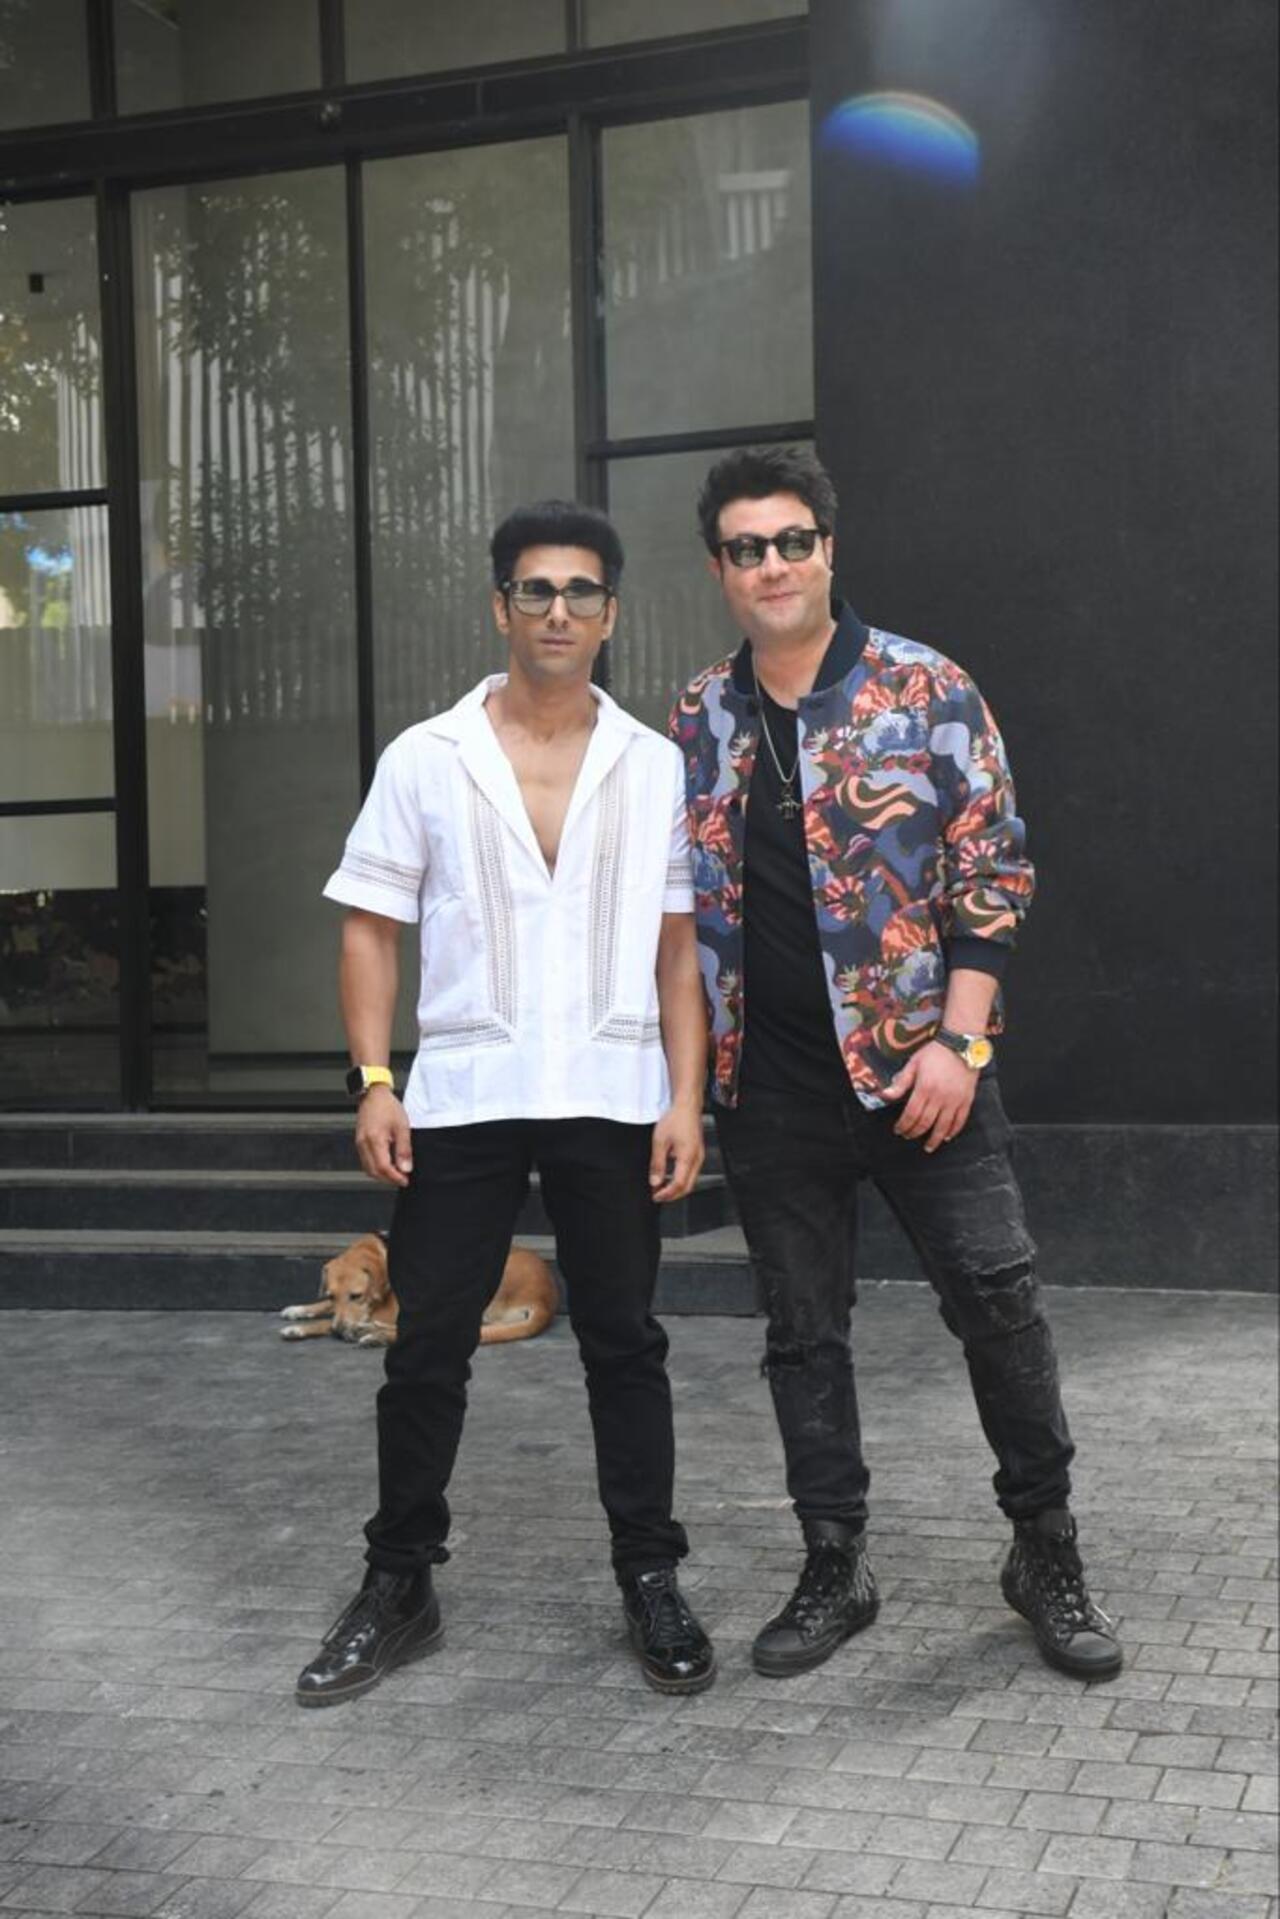 Fukrey 3 fame actors Varun Sharma and Pulkit Samrat were snapped in the city